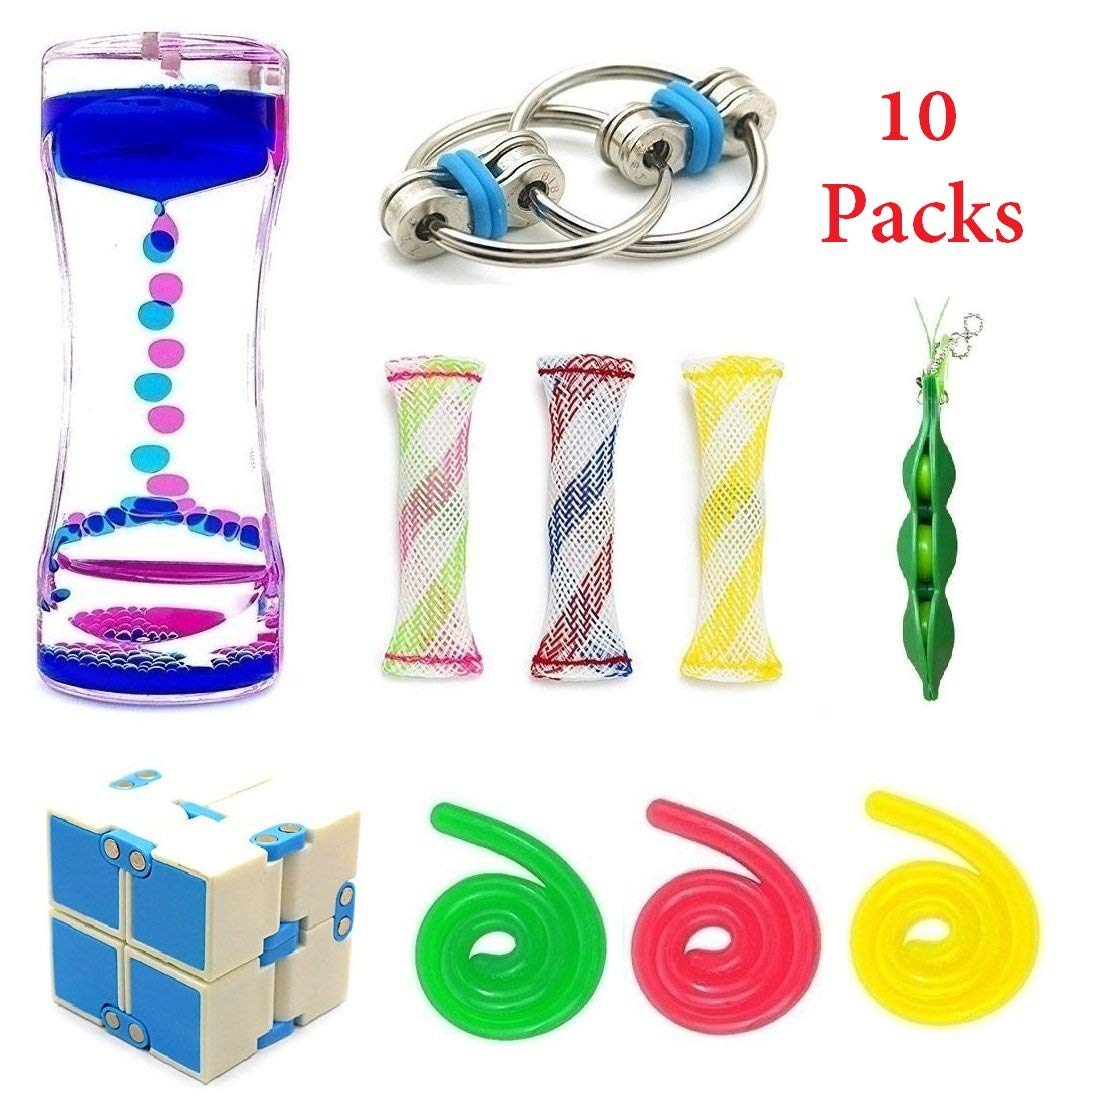 SpringFly 10pcs Sensory Toys Bundle-Liquid Motion Timer/Fidget Bike Chain/Squeeze Soybean/Stretchy Strings For ADD ADHD Stress Relief Fidget Toys - Click Image to Close